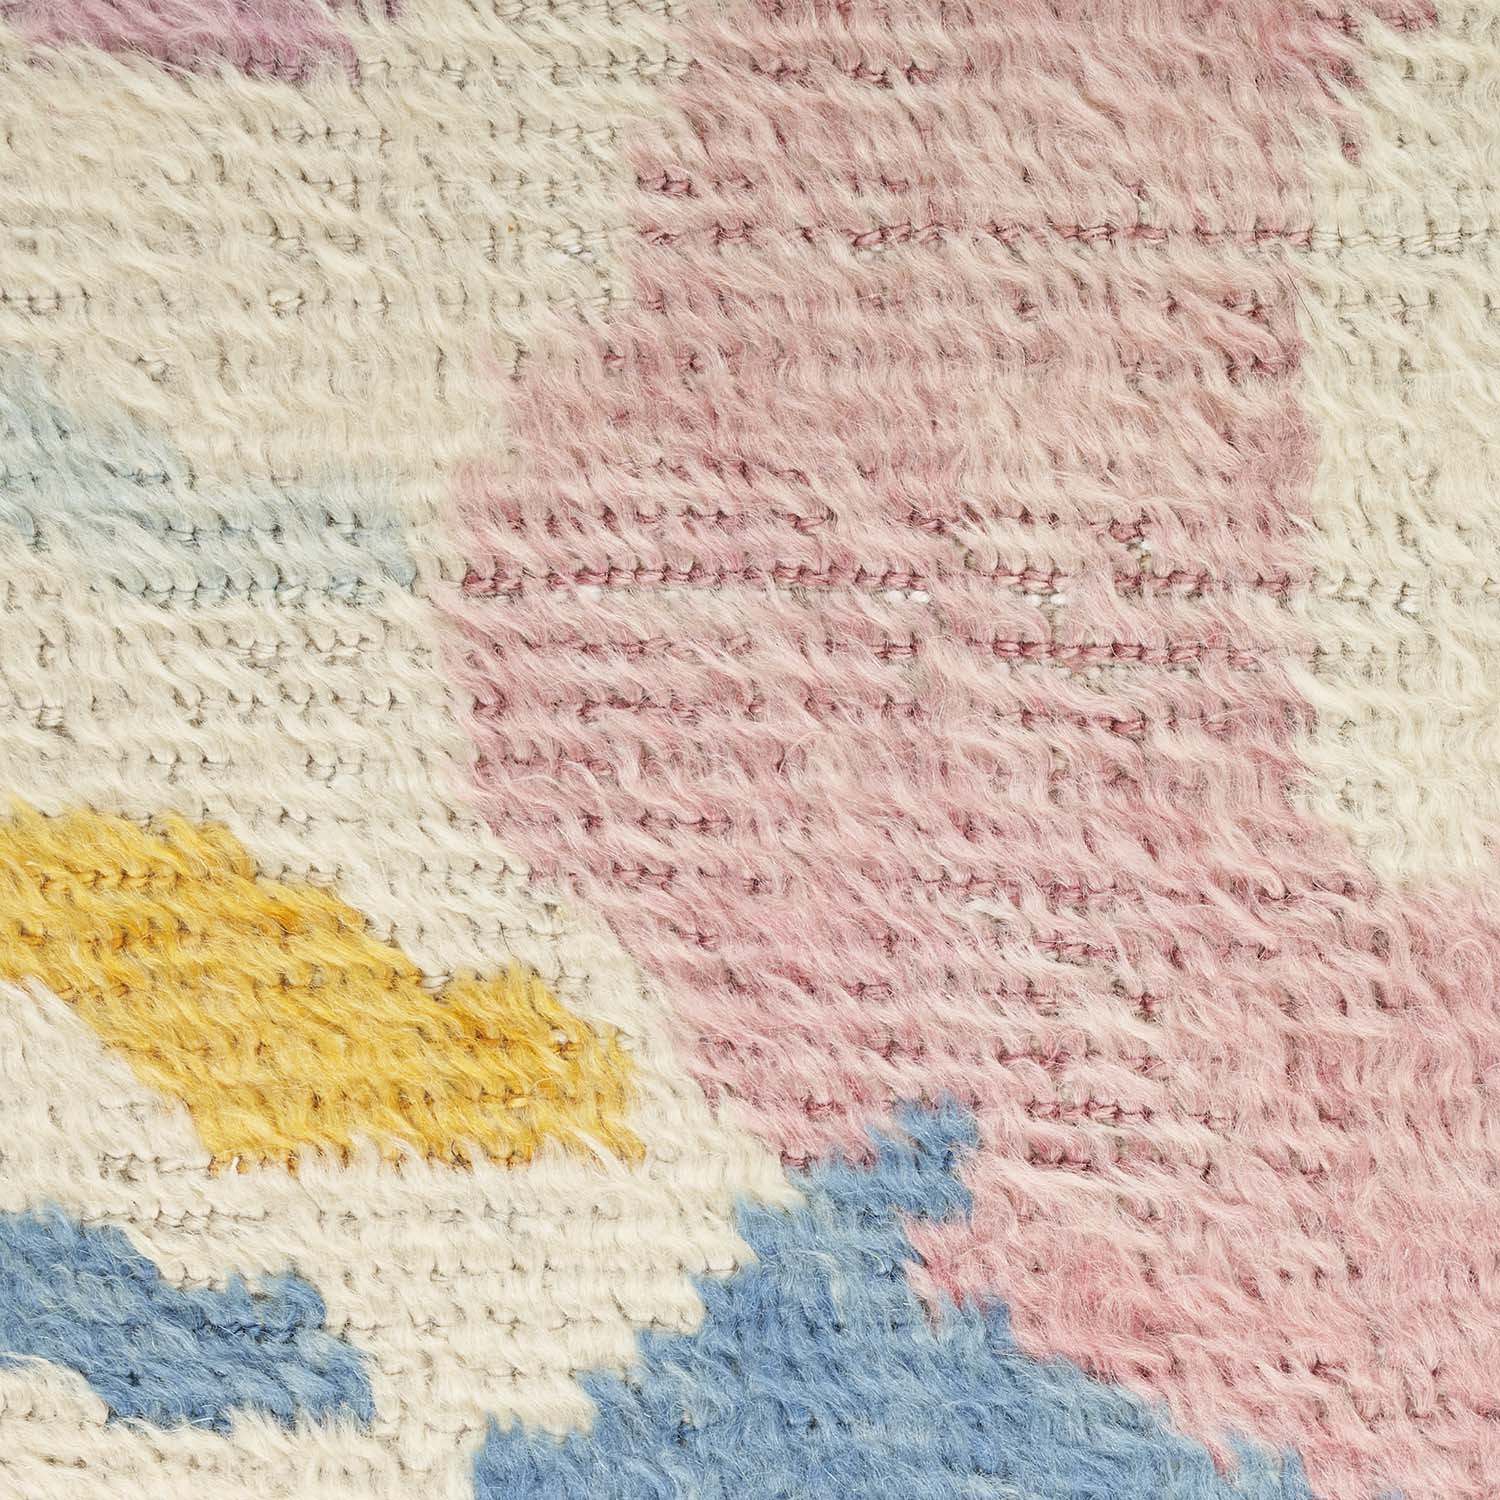 Close-up of a colorful, textured textile showcasing intricate weaving technique.